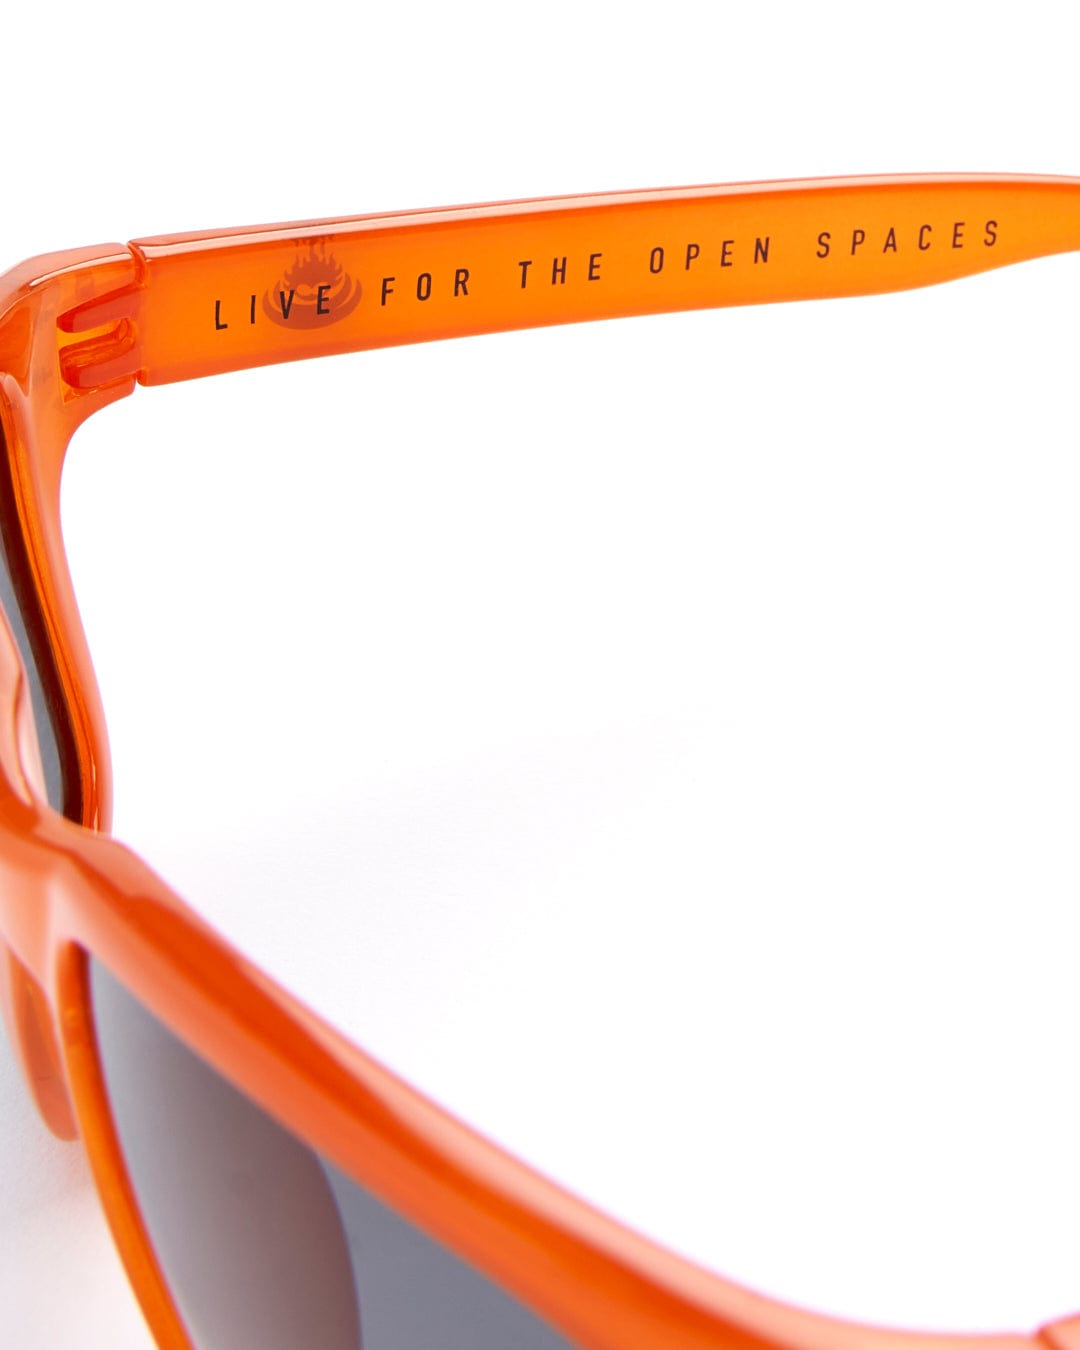 A pair of Ranger - Recycled Polarised Sunglasses - Orange with UV400 protection and a message that reads "Live for the open spaces" on the frame. (Saltrock)